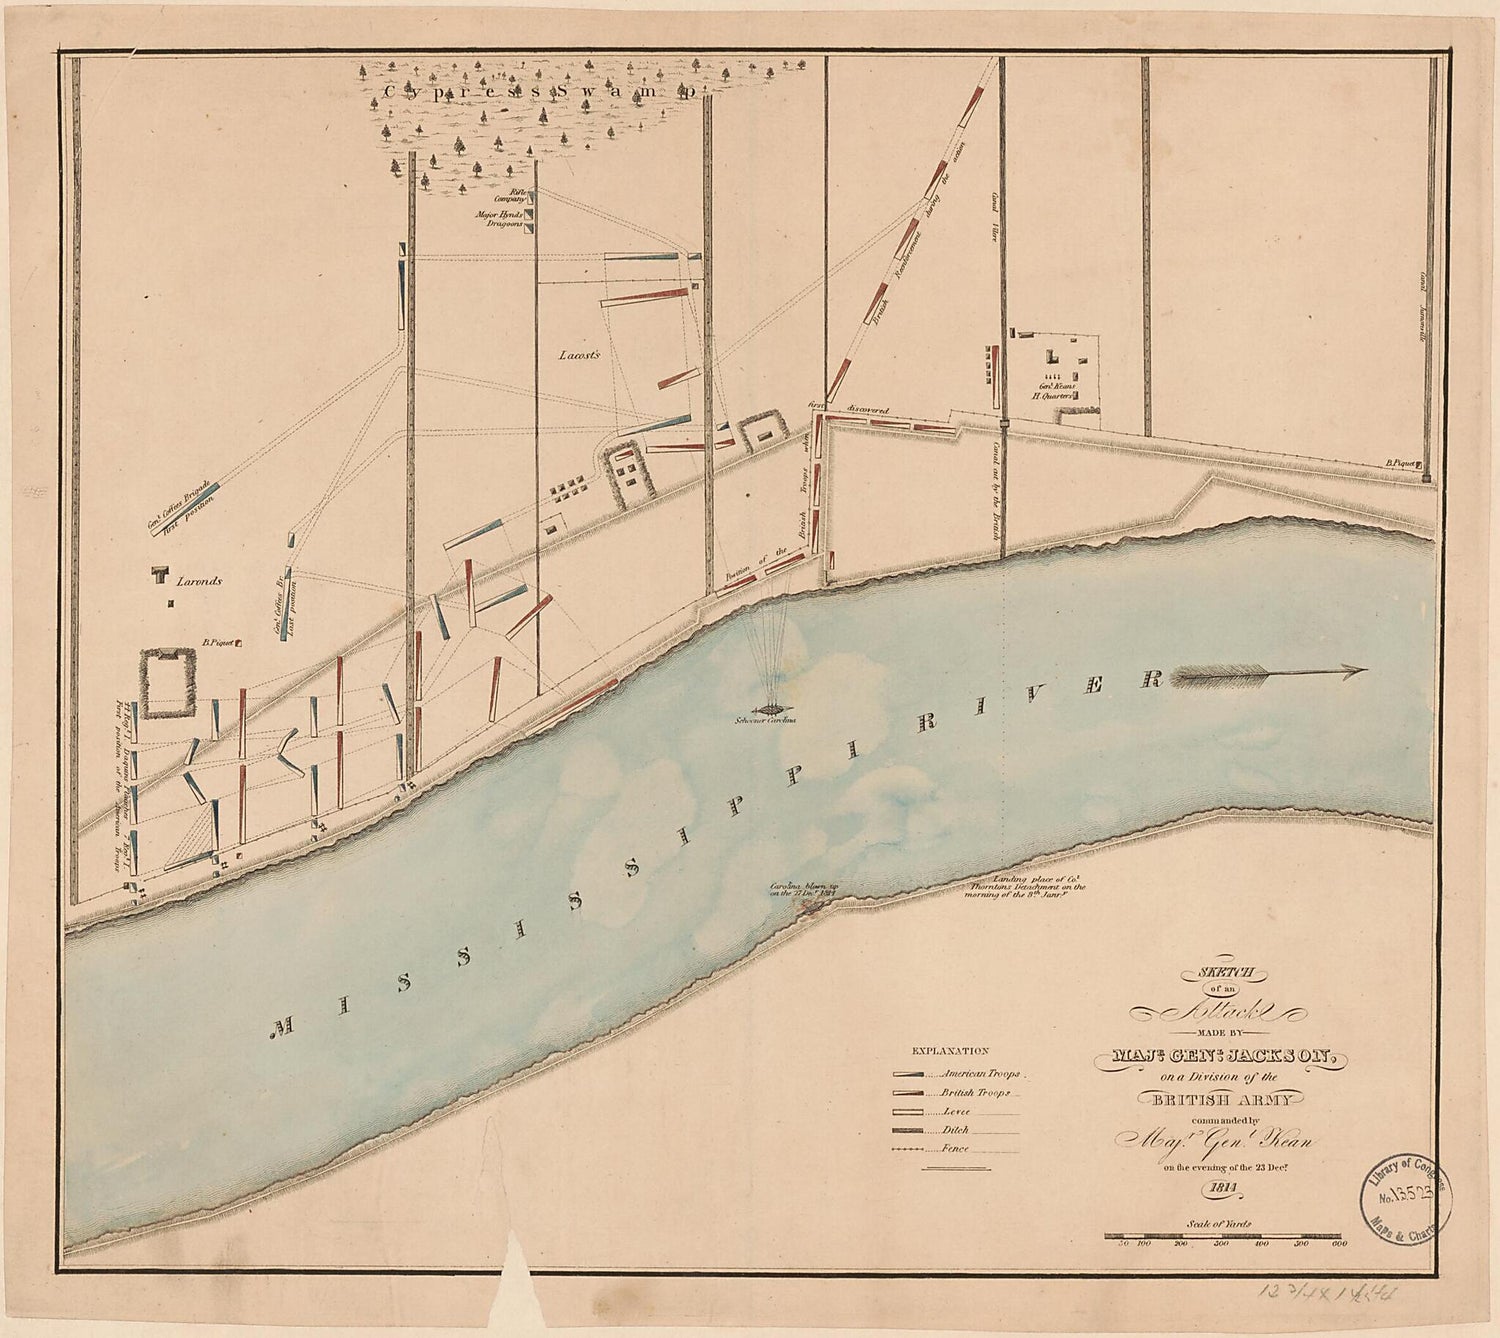 This old map of Sketch of an Attack Made by Majr. Genl. Jackson On a Division of the British Army Commanded by Majr. Genl. Kean On the Evening of the 23 Decr. from 1814 was created by Andrew Jackson, John Keane in 1814